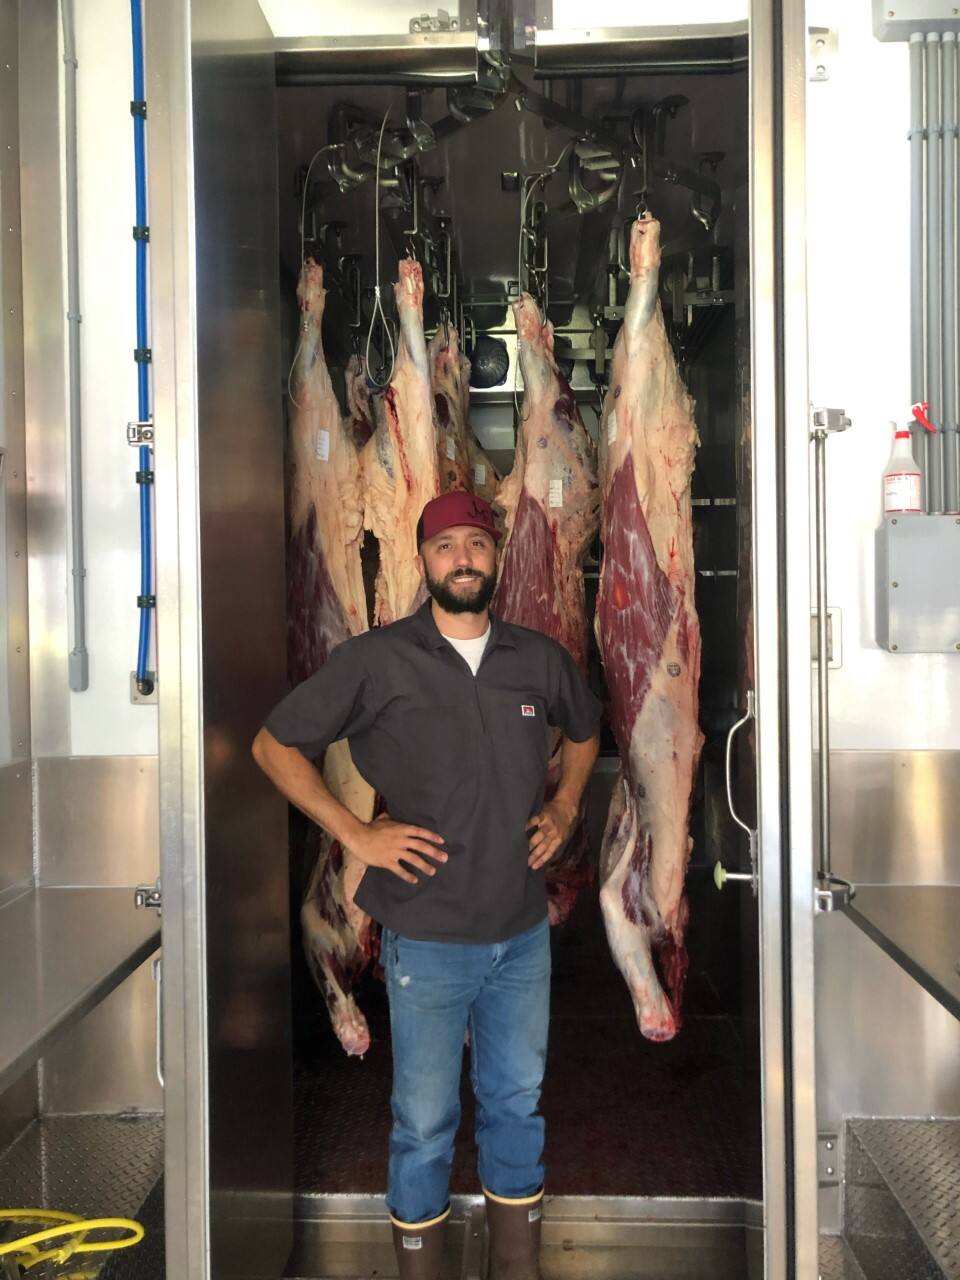 John M. Fagundes, operator of JMF Slaughter of Petaluma, stands with cattle carcasses hanging in the 36-foot mobile slaughterhouse he got rolling in spring 2021. (courtesy of JMF Slaughter)